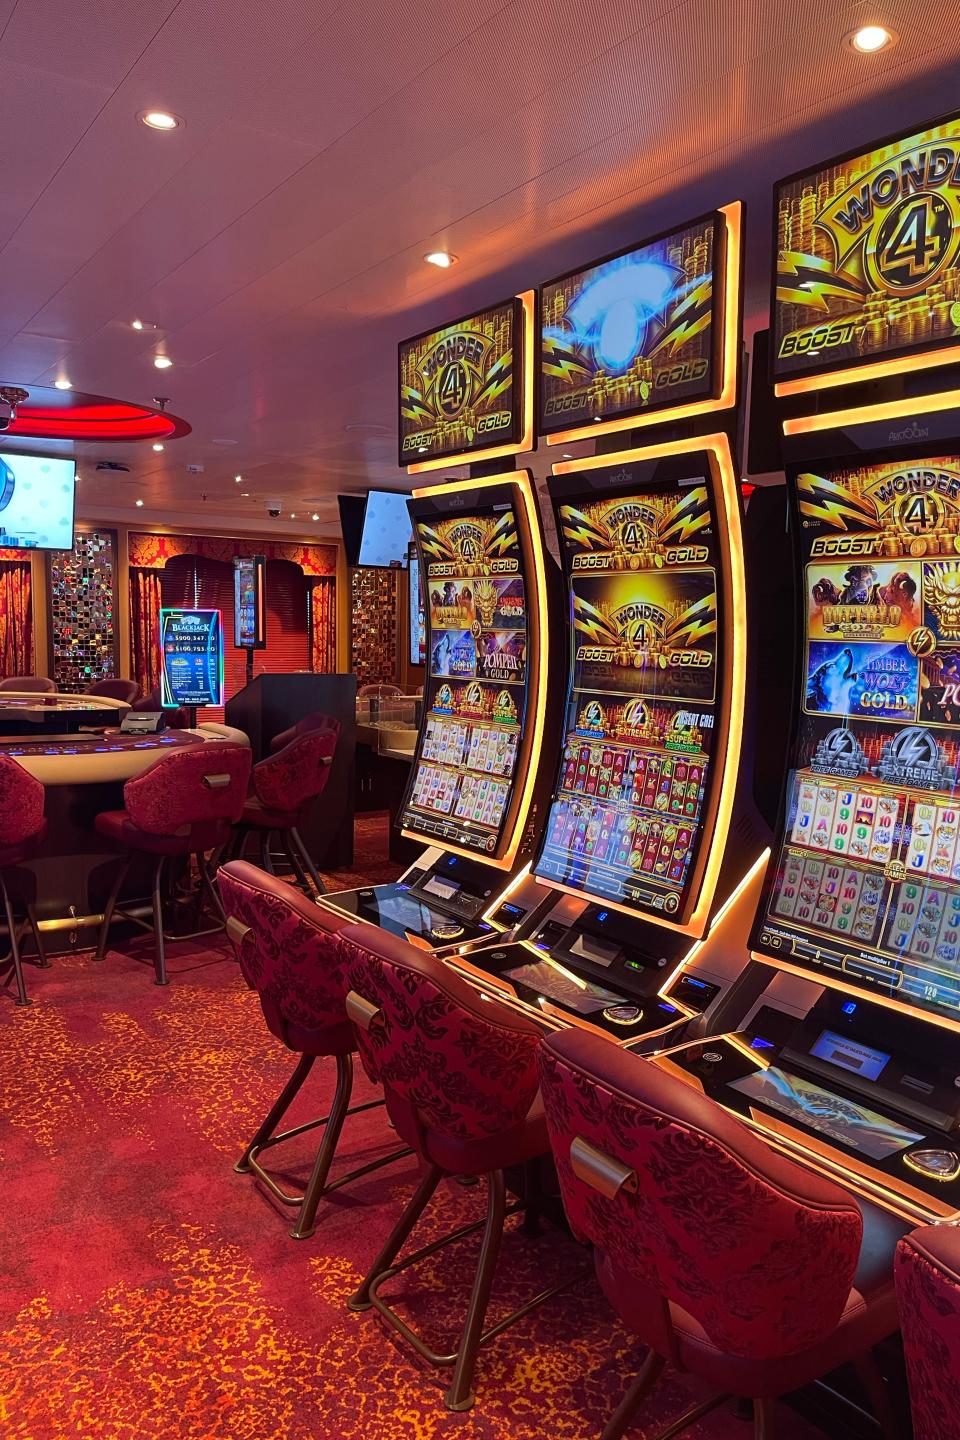 Slot machines in a casino with screen displaying game options like 'Wild Lepre'coins', 'Buffalo Gold', and 'Pompeii'